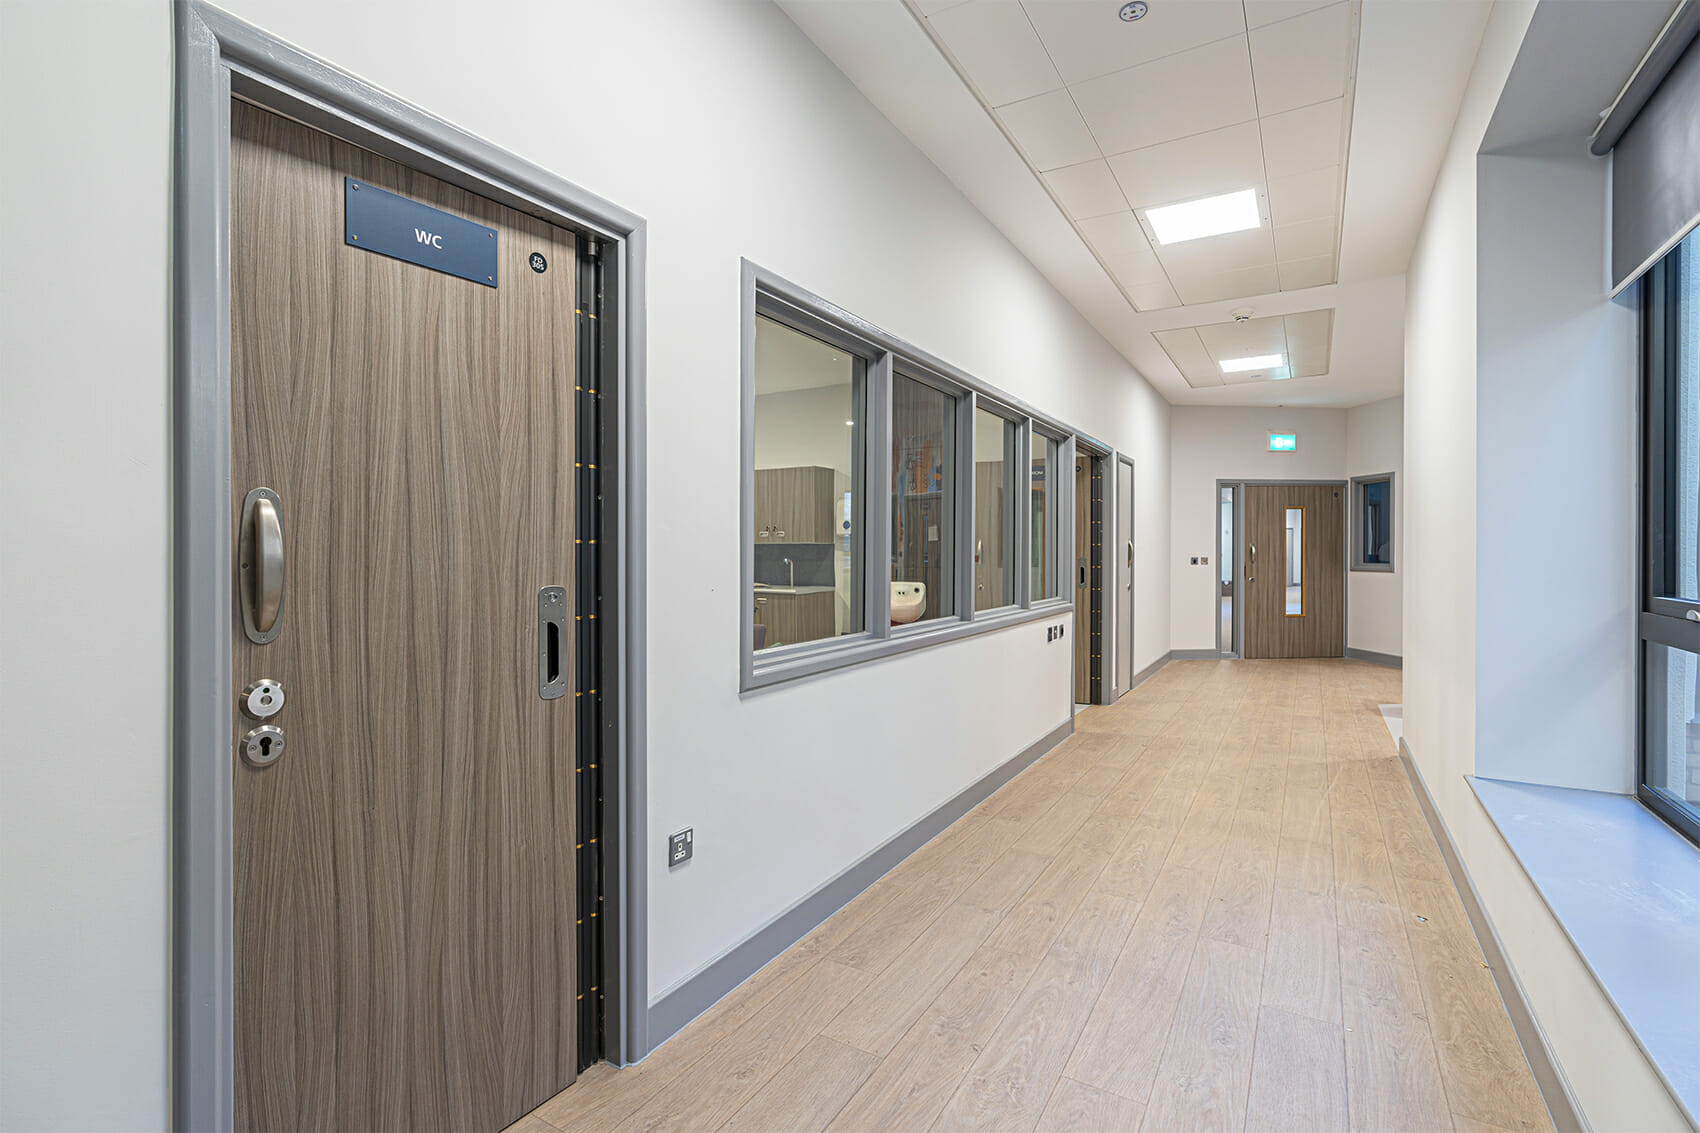 Kingsway Group UK provide specialist door systems to reduce risk and improve safety in Acute Hospitals and Acute Care.